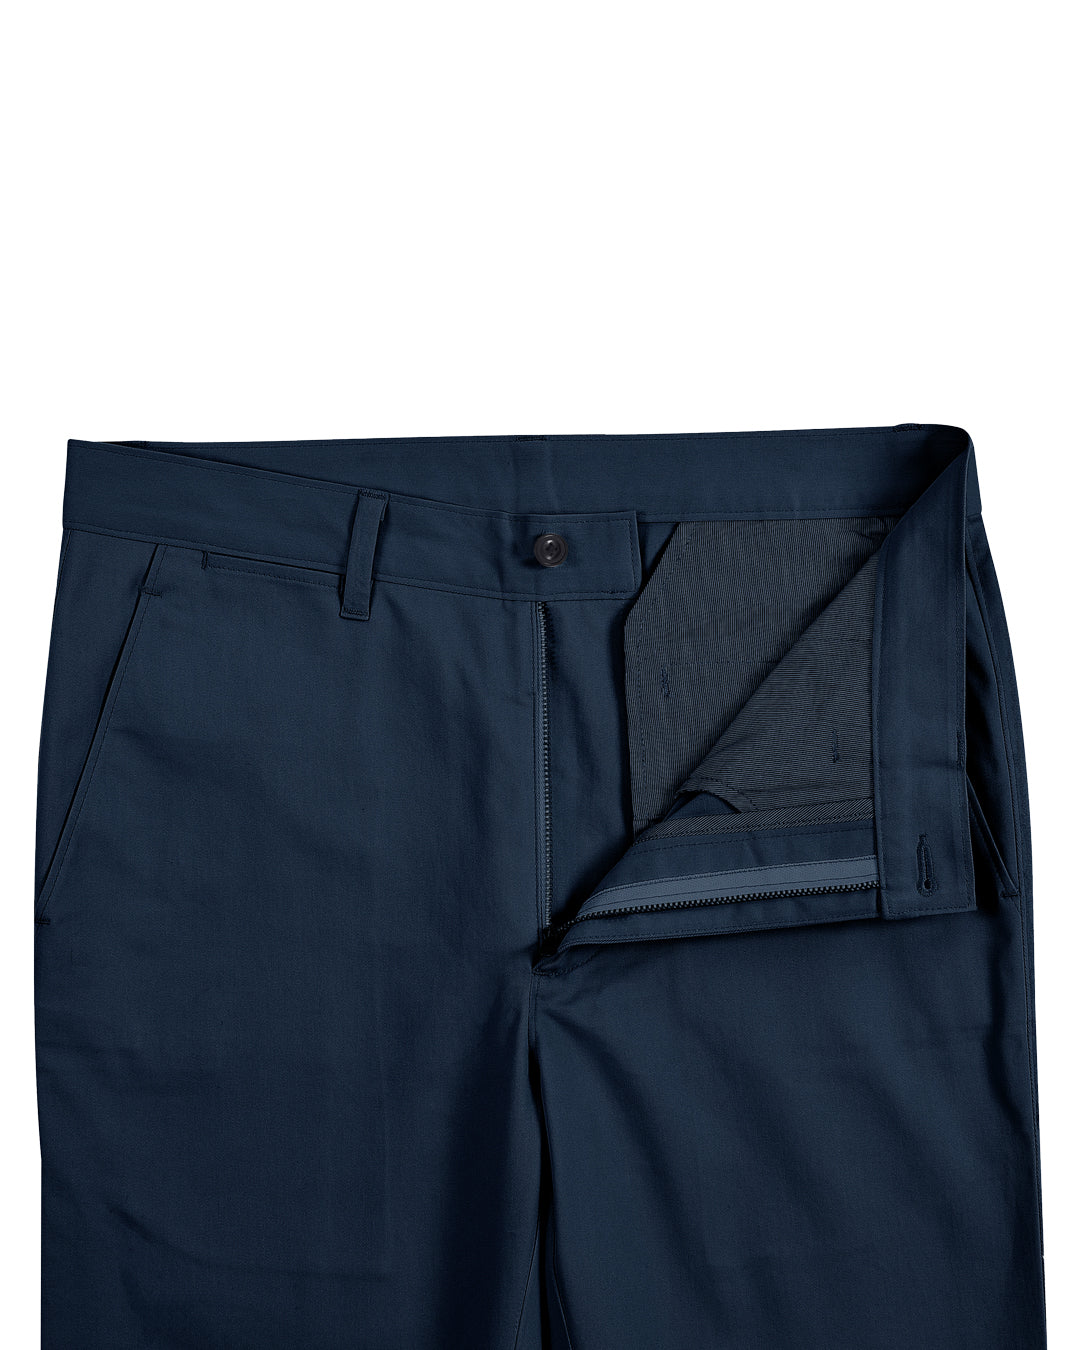 Open front view of custom Genoa Chino pants for men by Luxire in ink blue